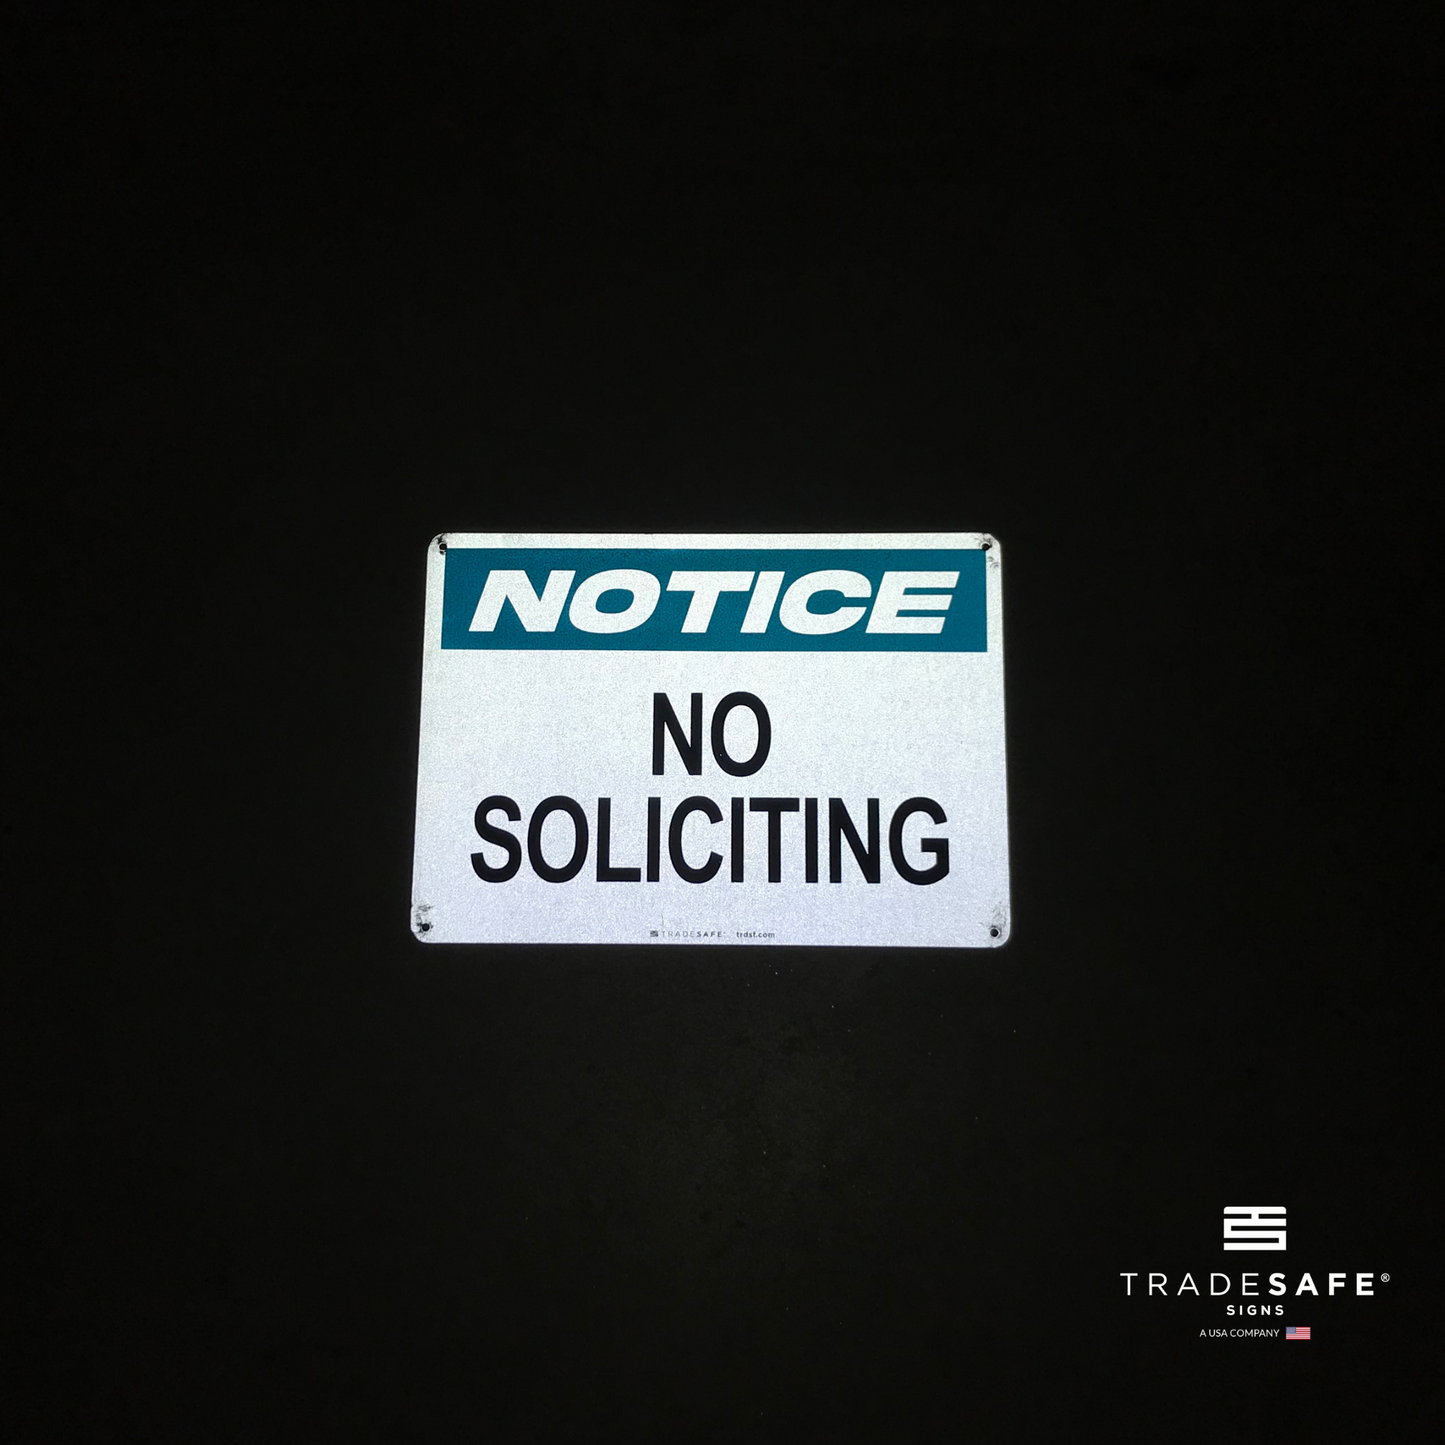 reflective attribute of no soliciting sign on black background